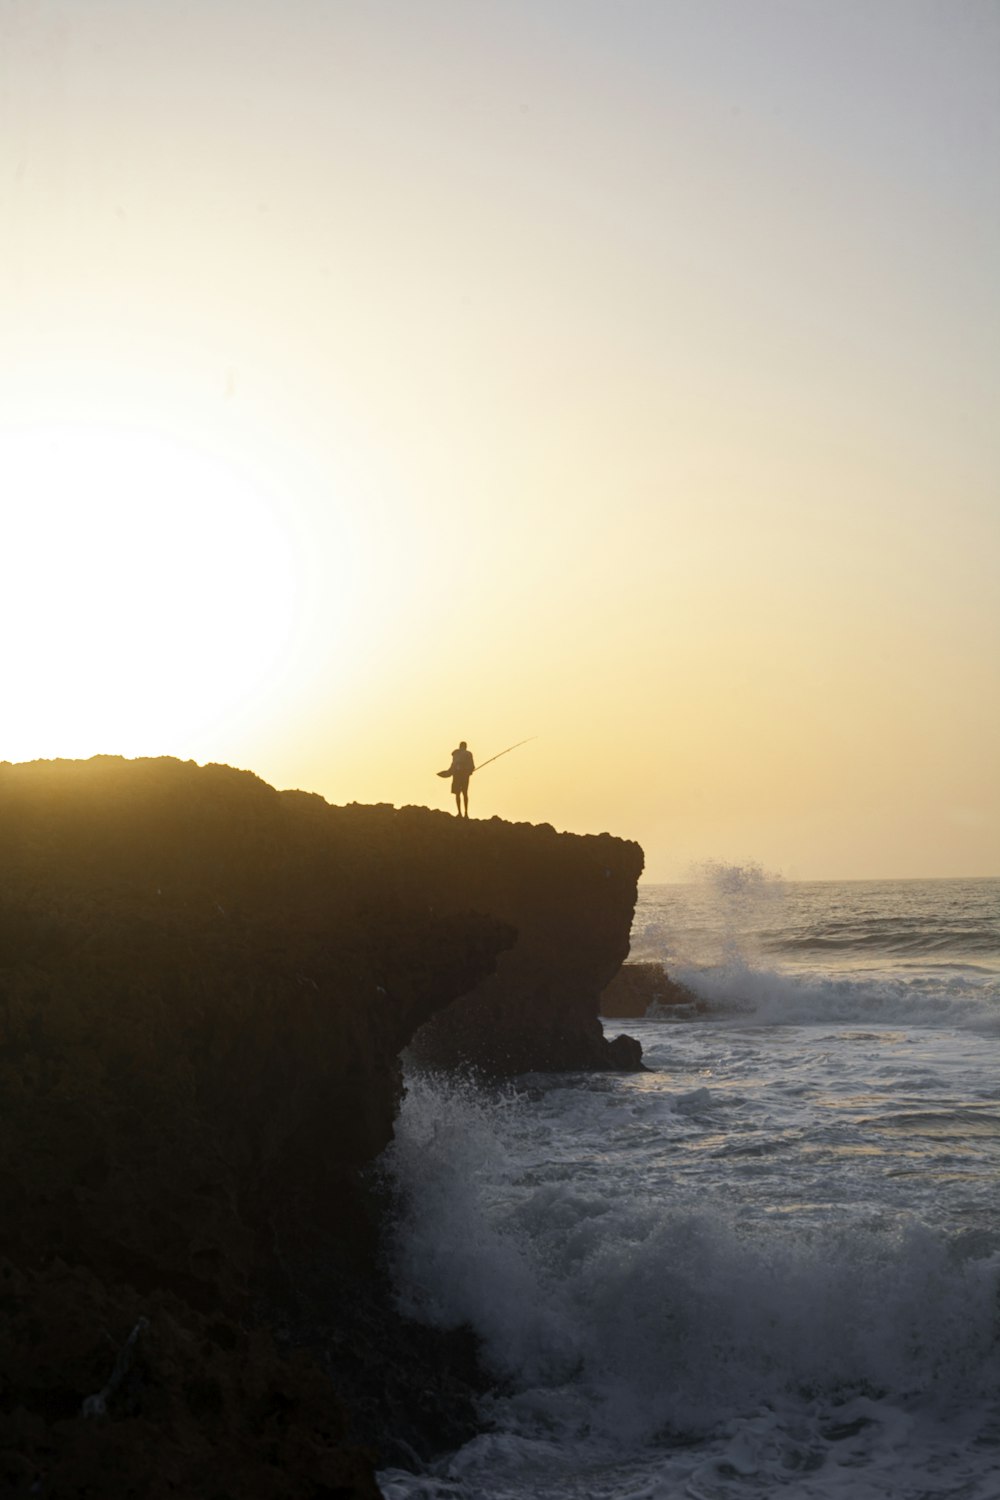 silhouette of person standing on rock formation near body of water during daytime